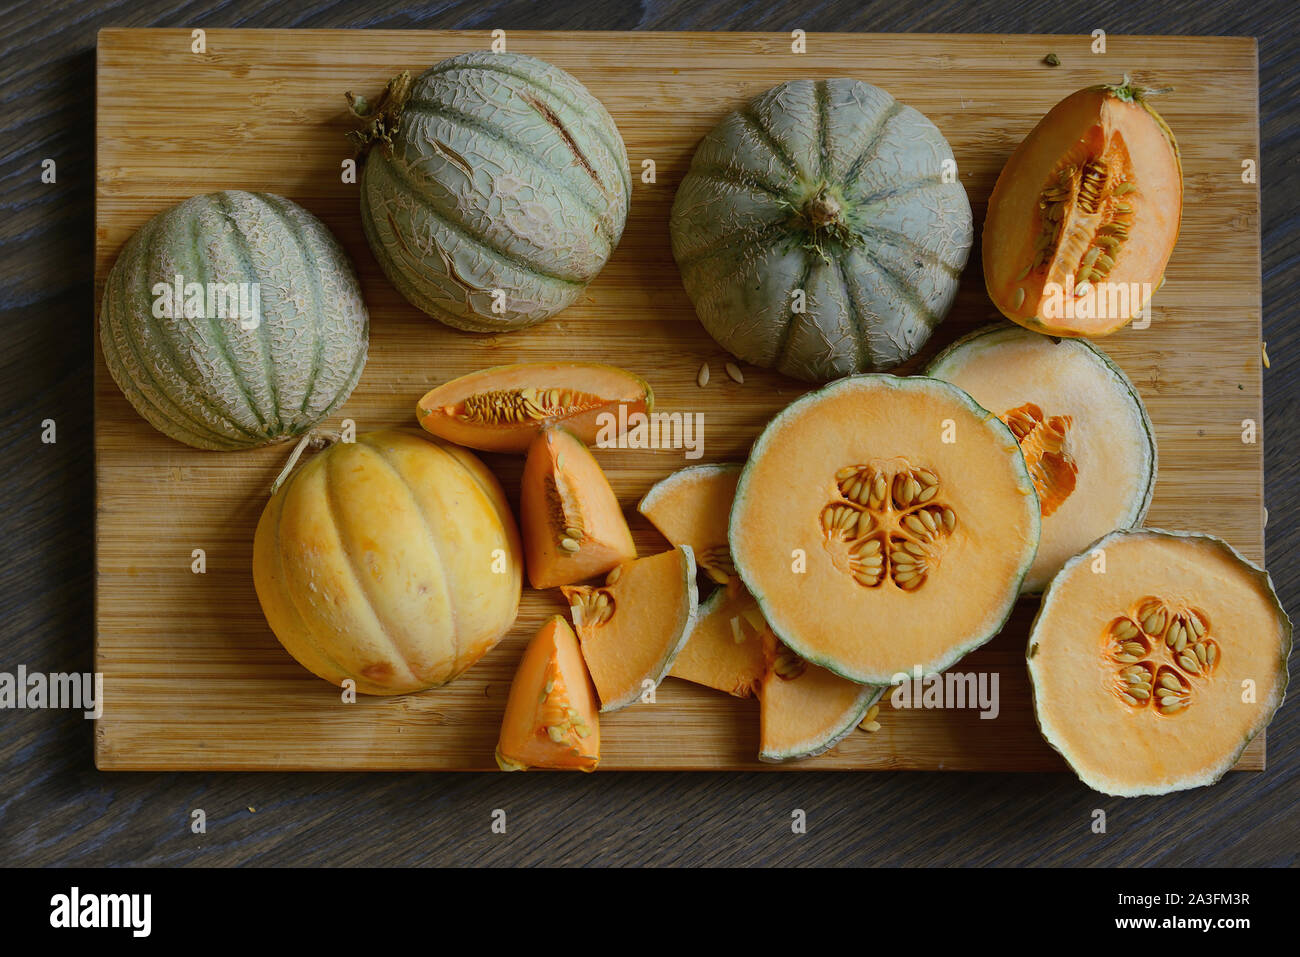 Heads of cantaloupe and pieces of melon of different shapes on the wooden surface.Rustic style.Flat lay. Stock Photo